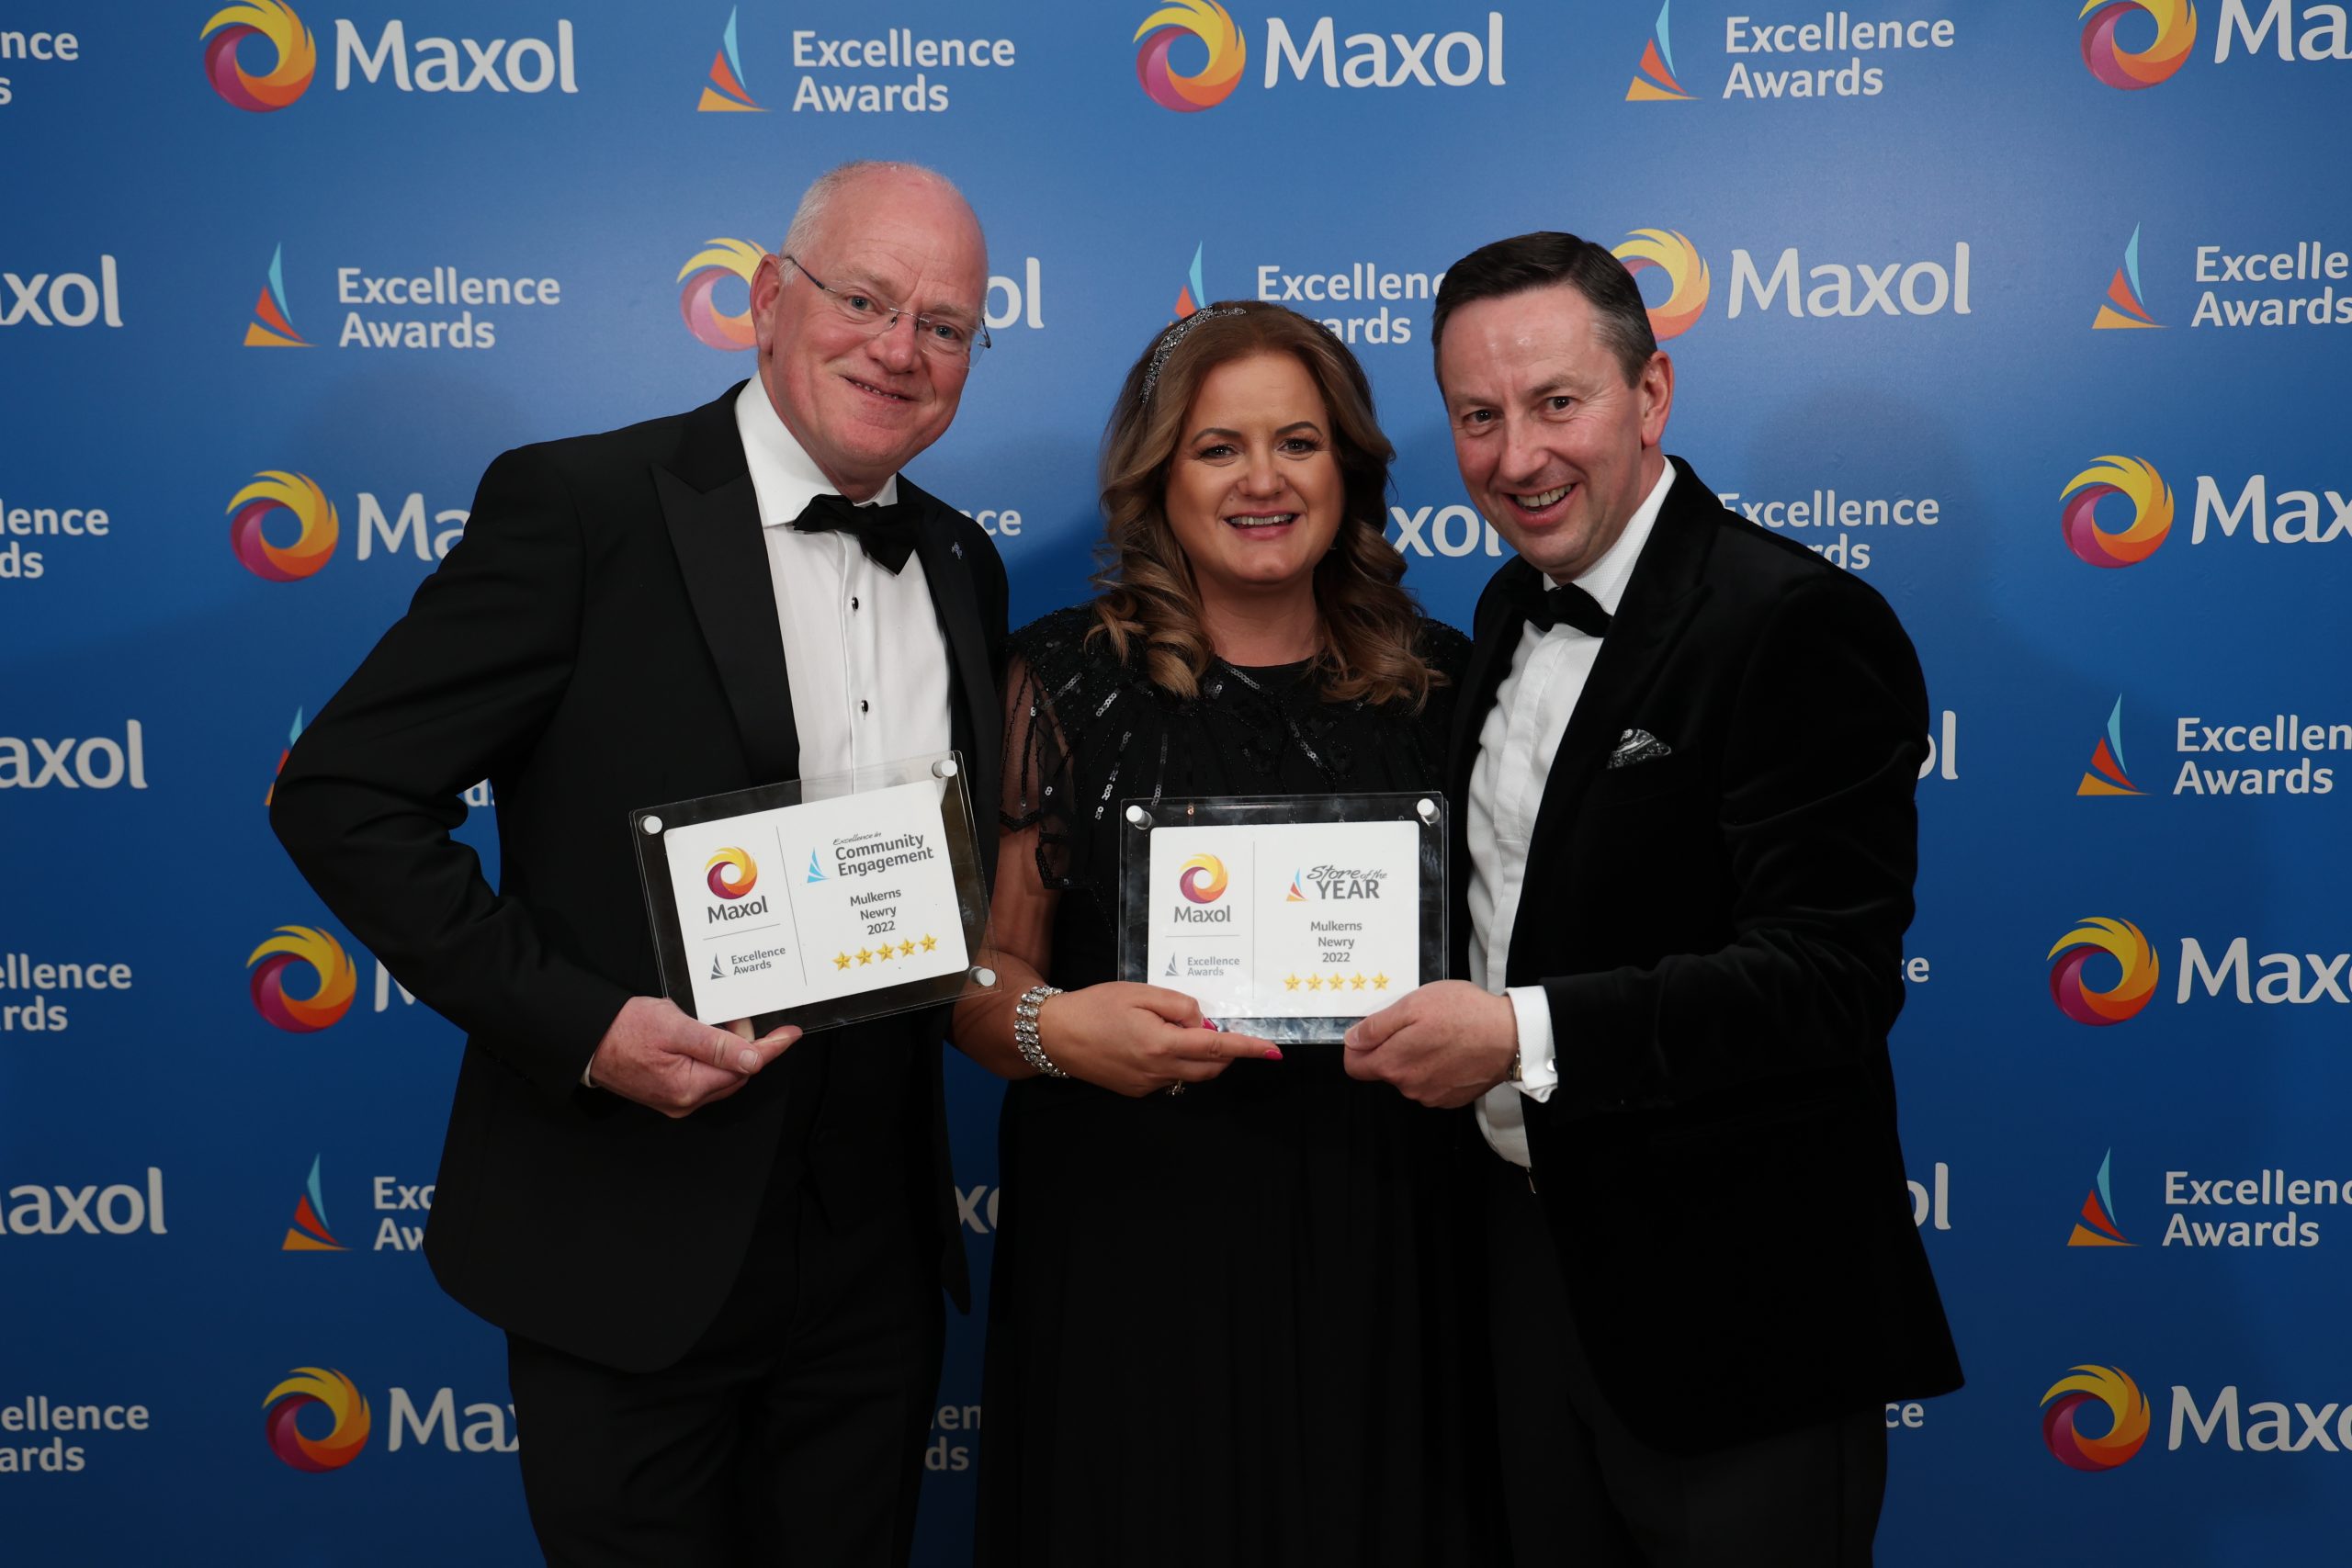 Maxol recognises exceptional NI service stations at Excellence Awards